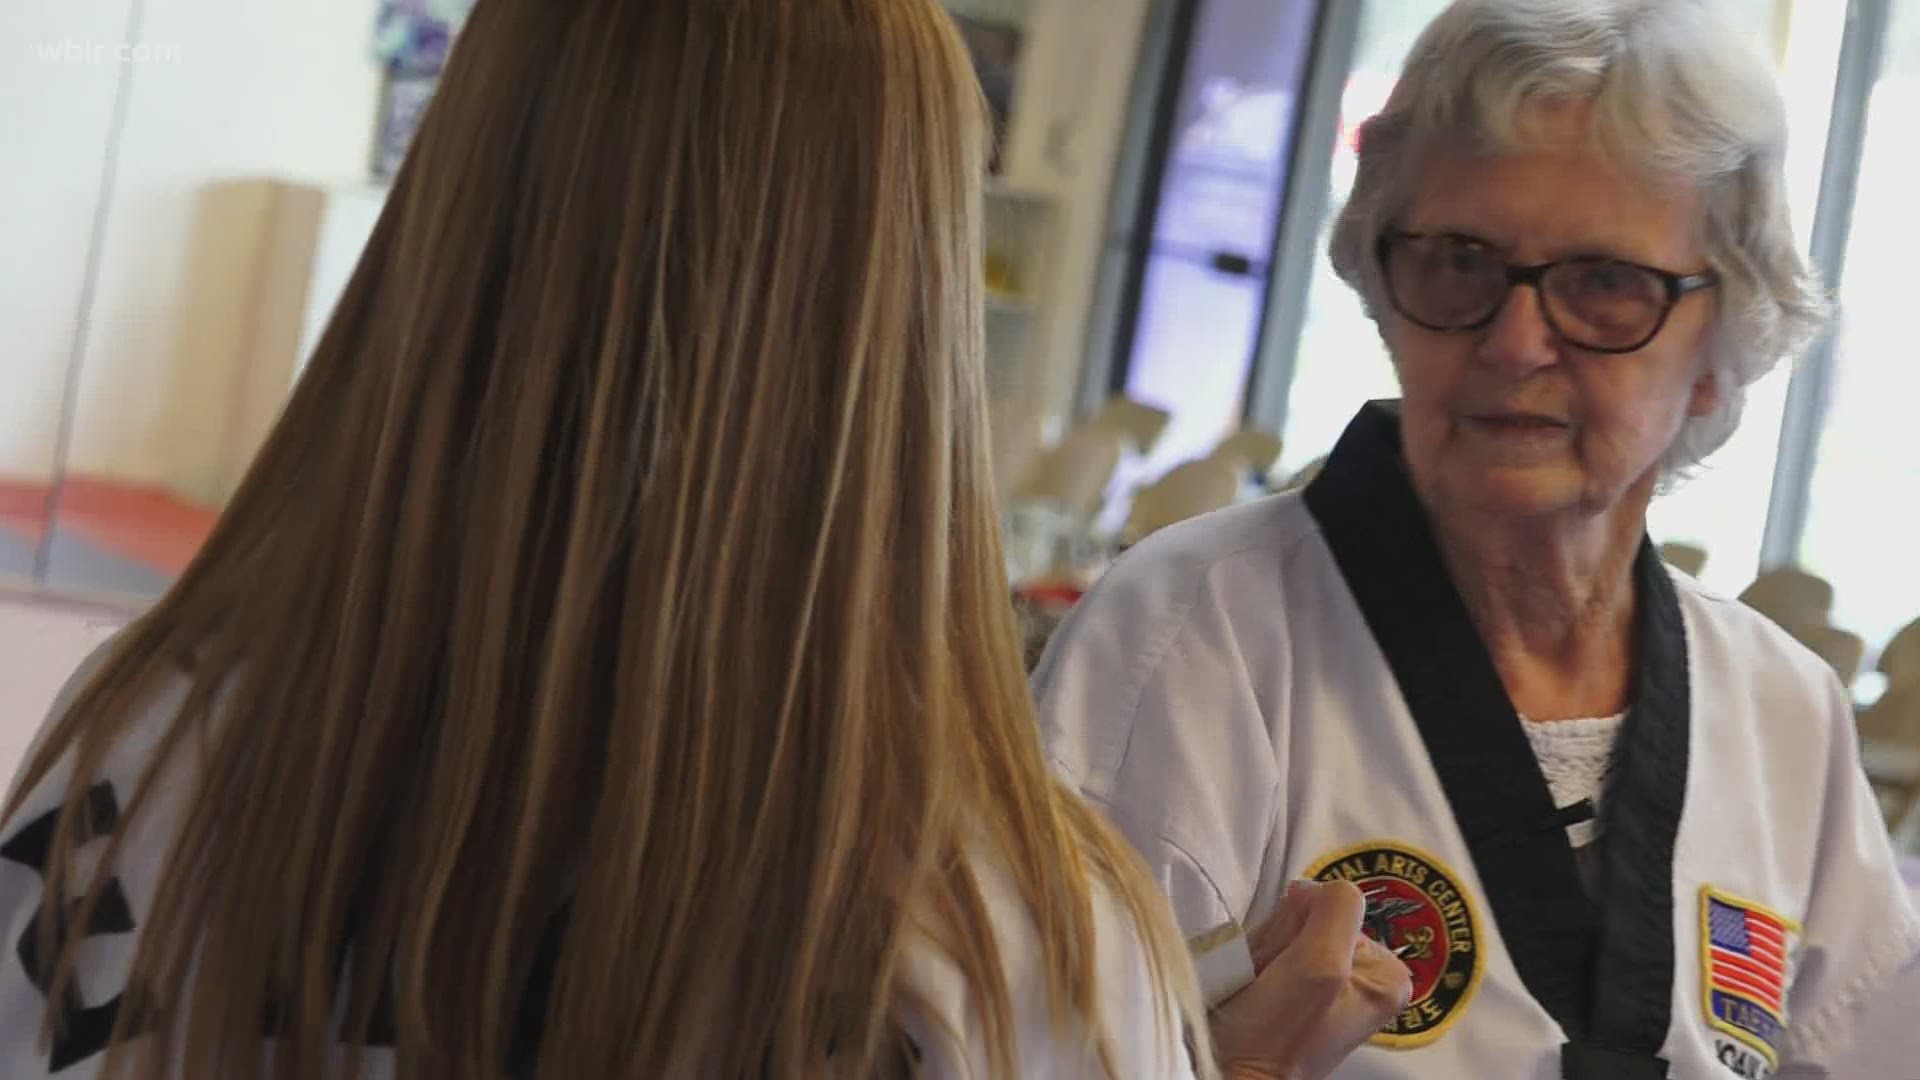 After first starting taekwondo in the early 90s, Joan Boling decided it was time to pick it up again.